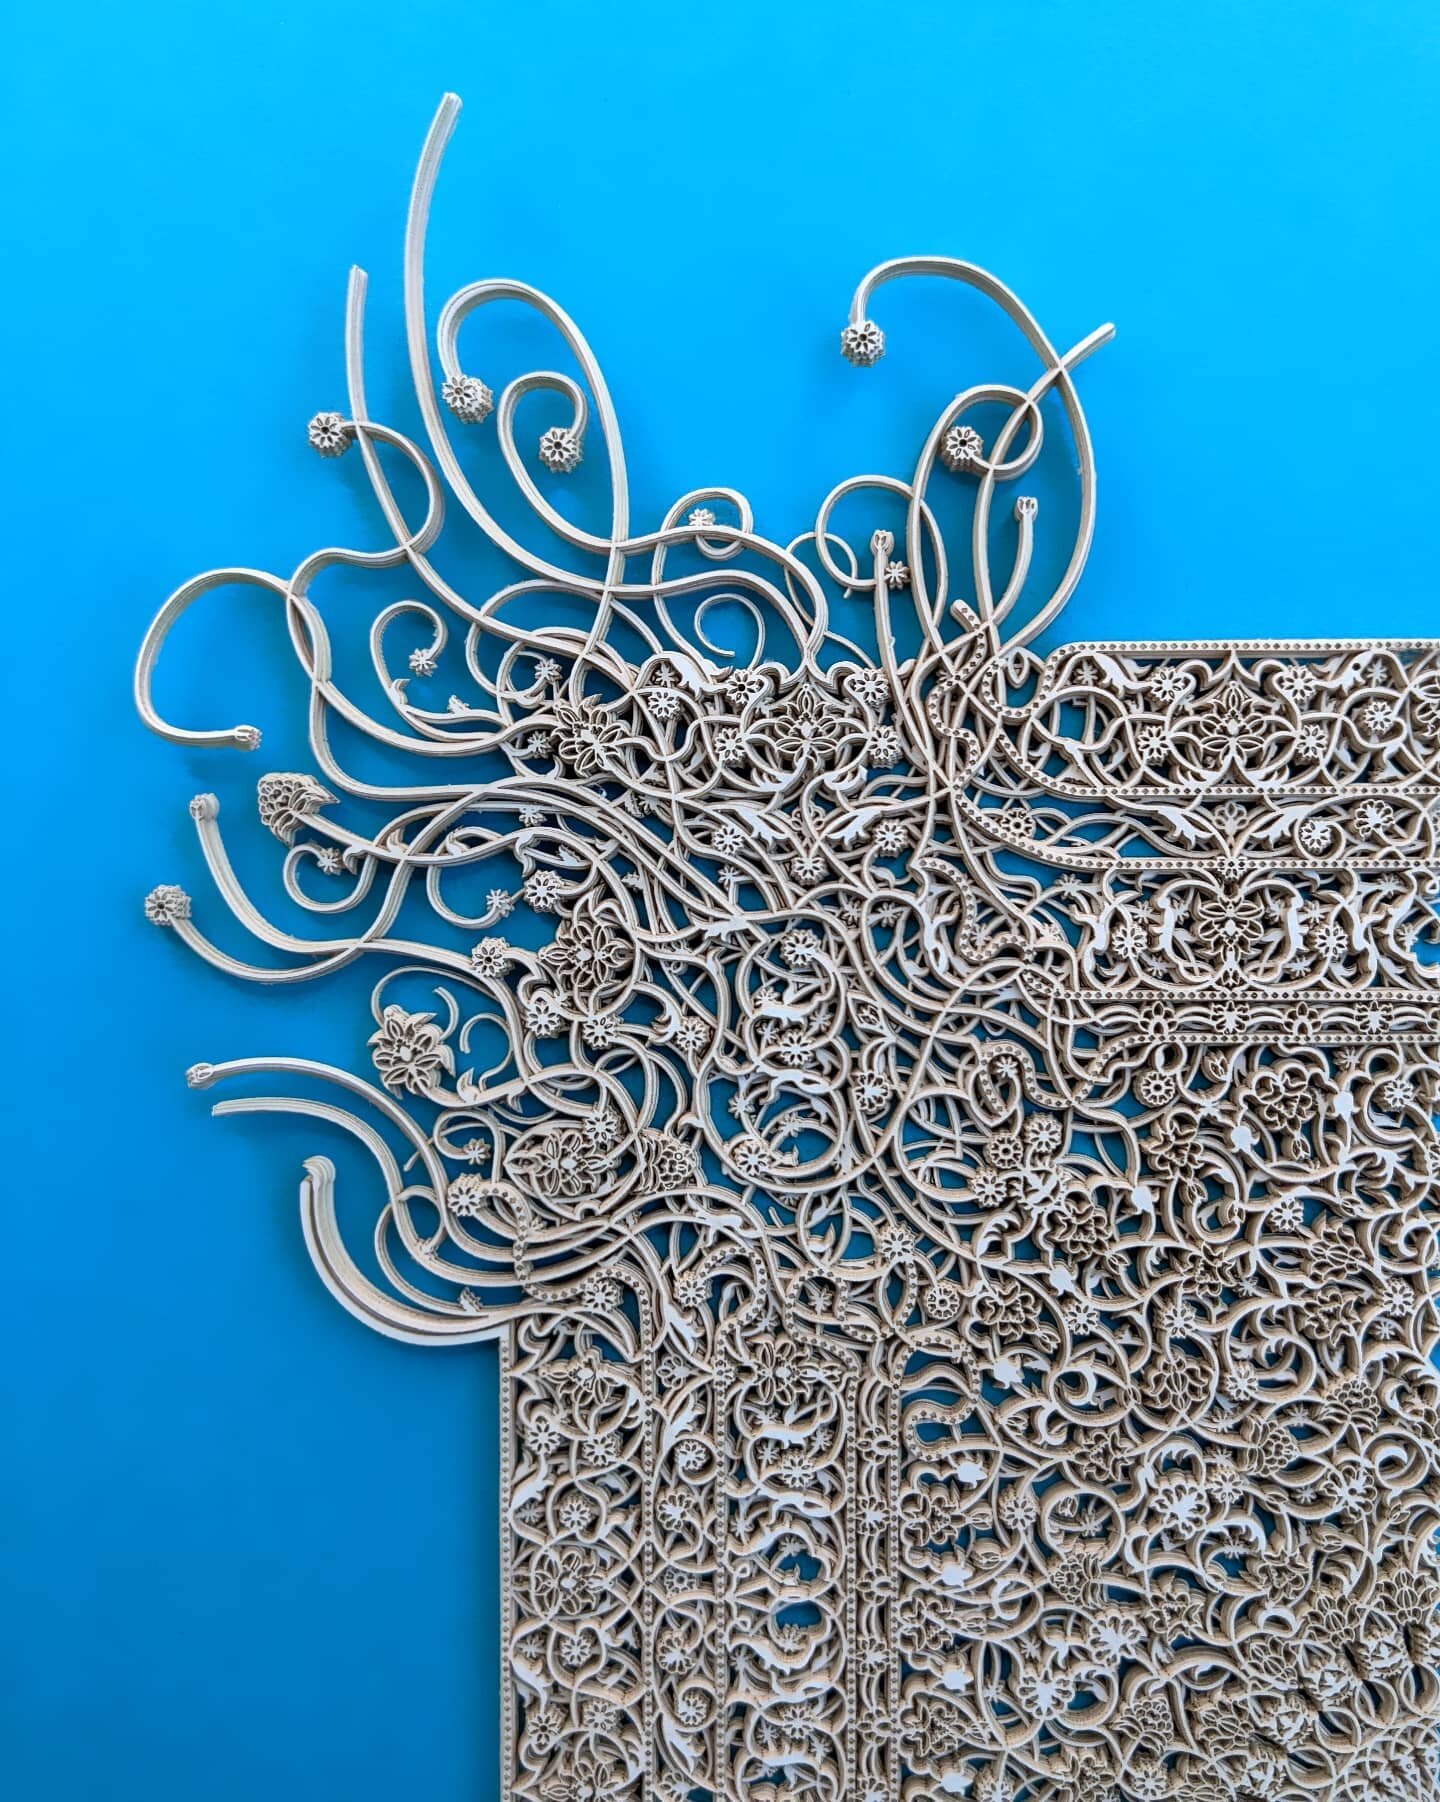 Pattern research and sample tests underway, the section in this image measures just 10cm x 12cm and is made from layered cut papers 🧐

#detailphoto #workinprogress&nbsp;#patternresearch

#algorithm #script #handmade #lasercut #floraldesign #arabesqu